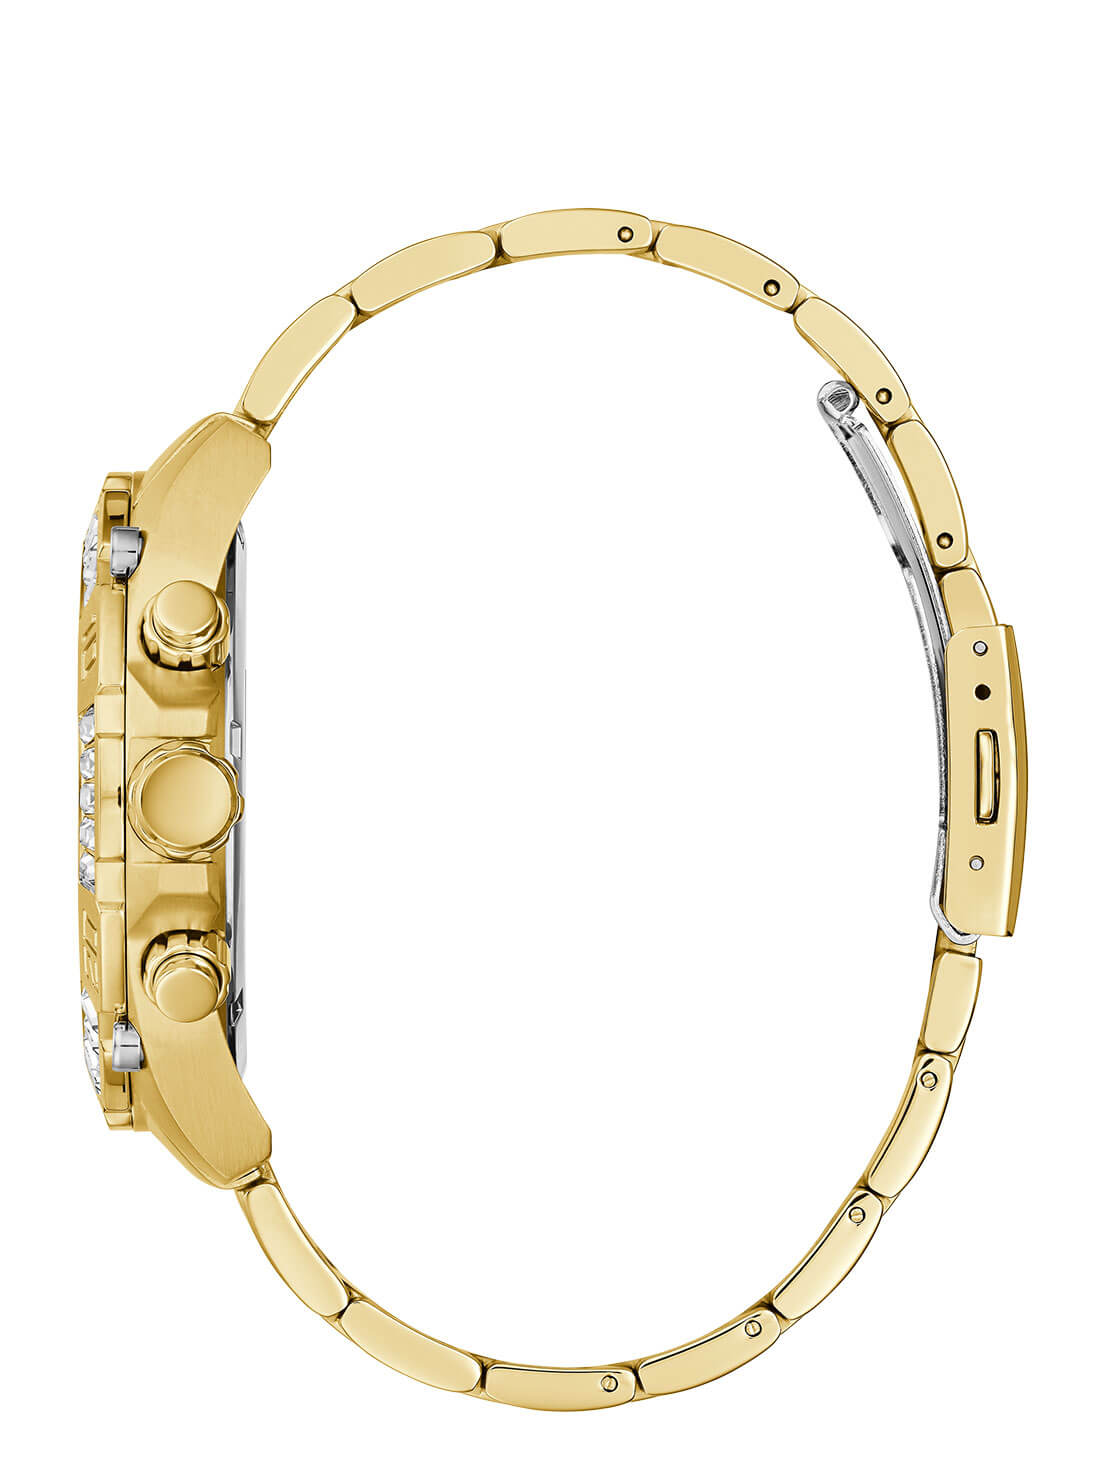 GUESS Mens Gold Trophy Watch GW0390G2 Side View